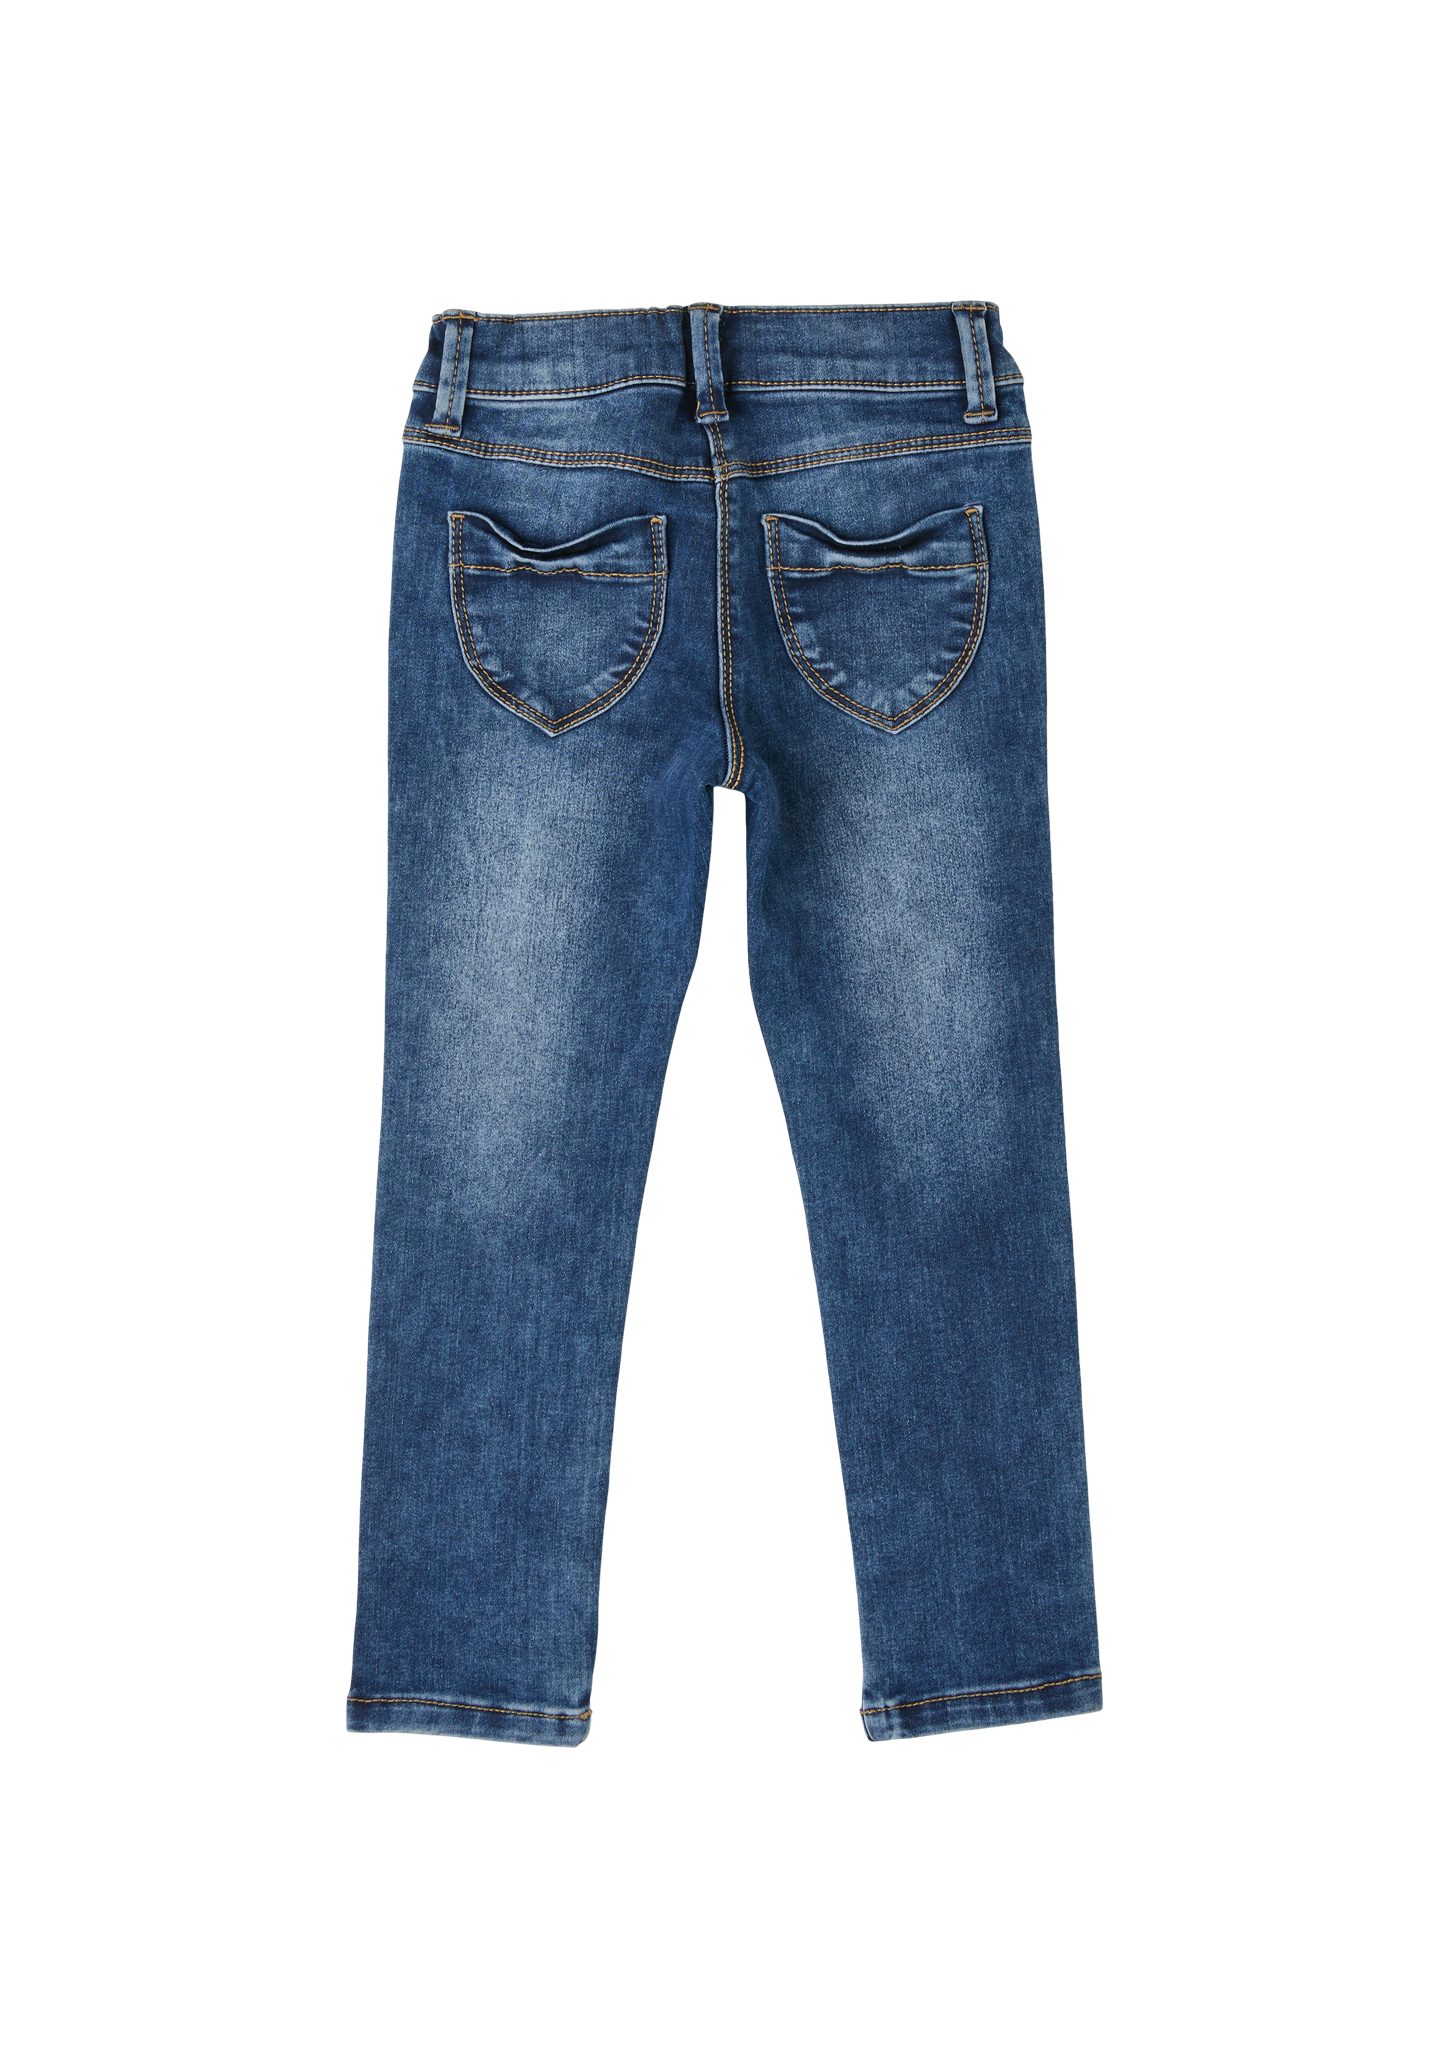 Rise / High s.Oliver Mid 5-Pocket-Jeans / Rise Jeans Fit Skinny Skinny / Waschung Treggings / Leg